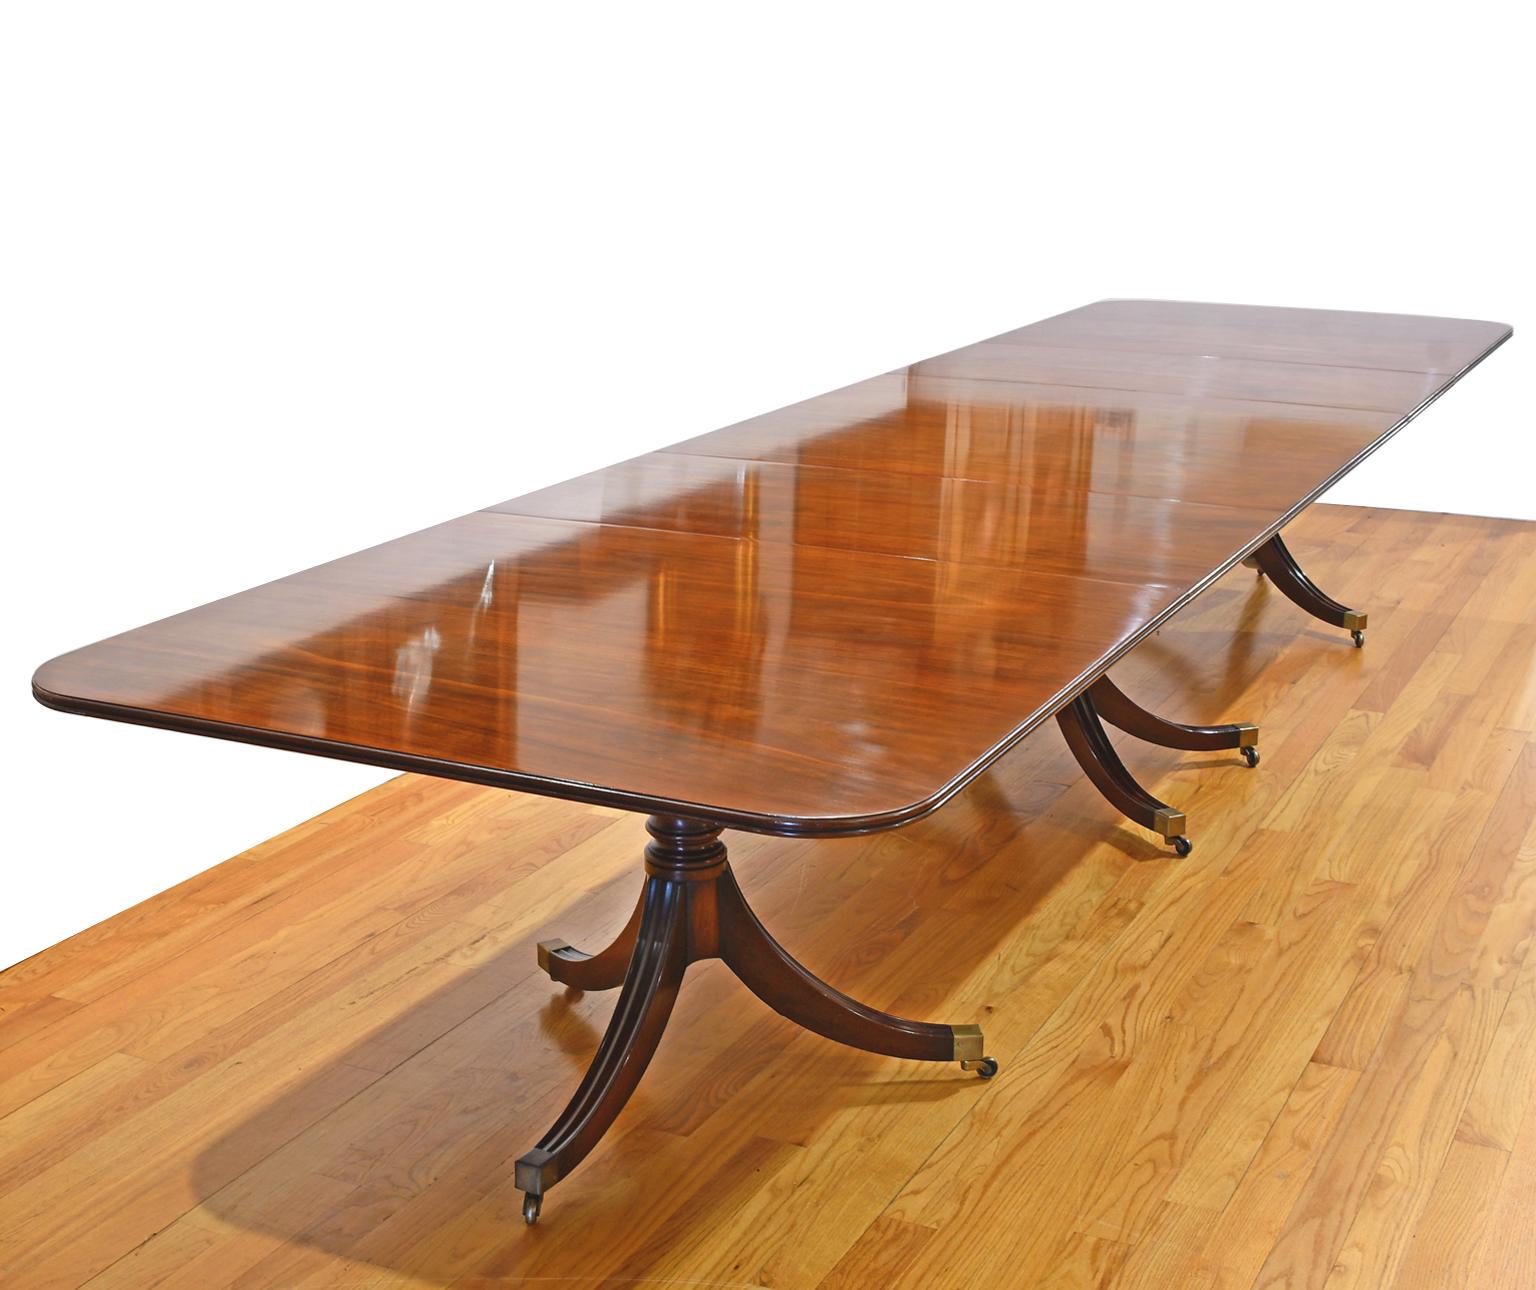 15' Antique English Banquet Dining Table in Mahogany w/ 3 Pedestals & 2 Leaves 2